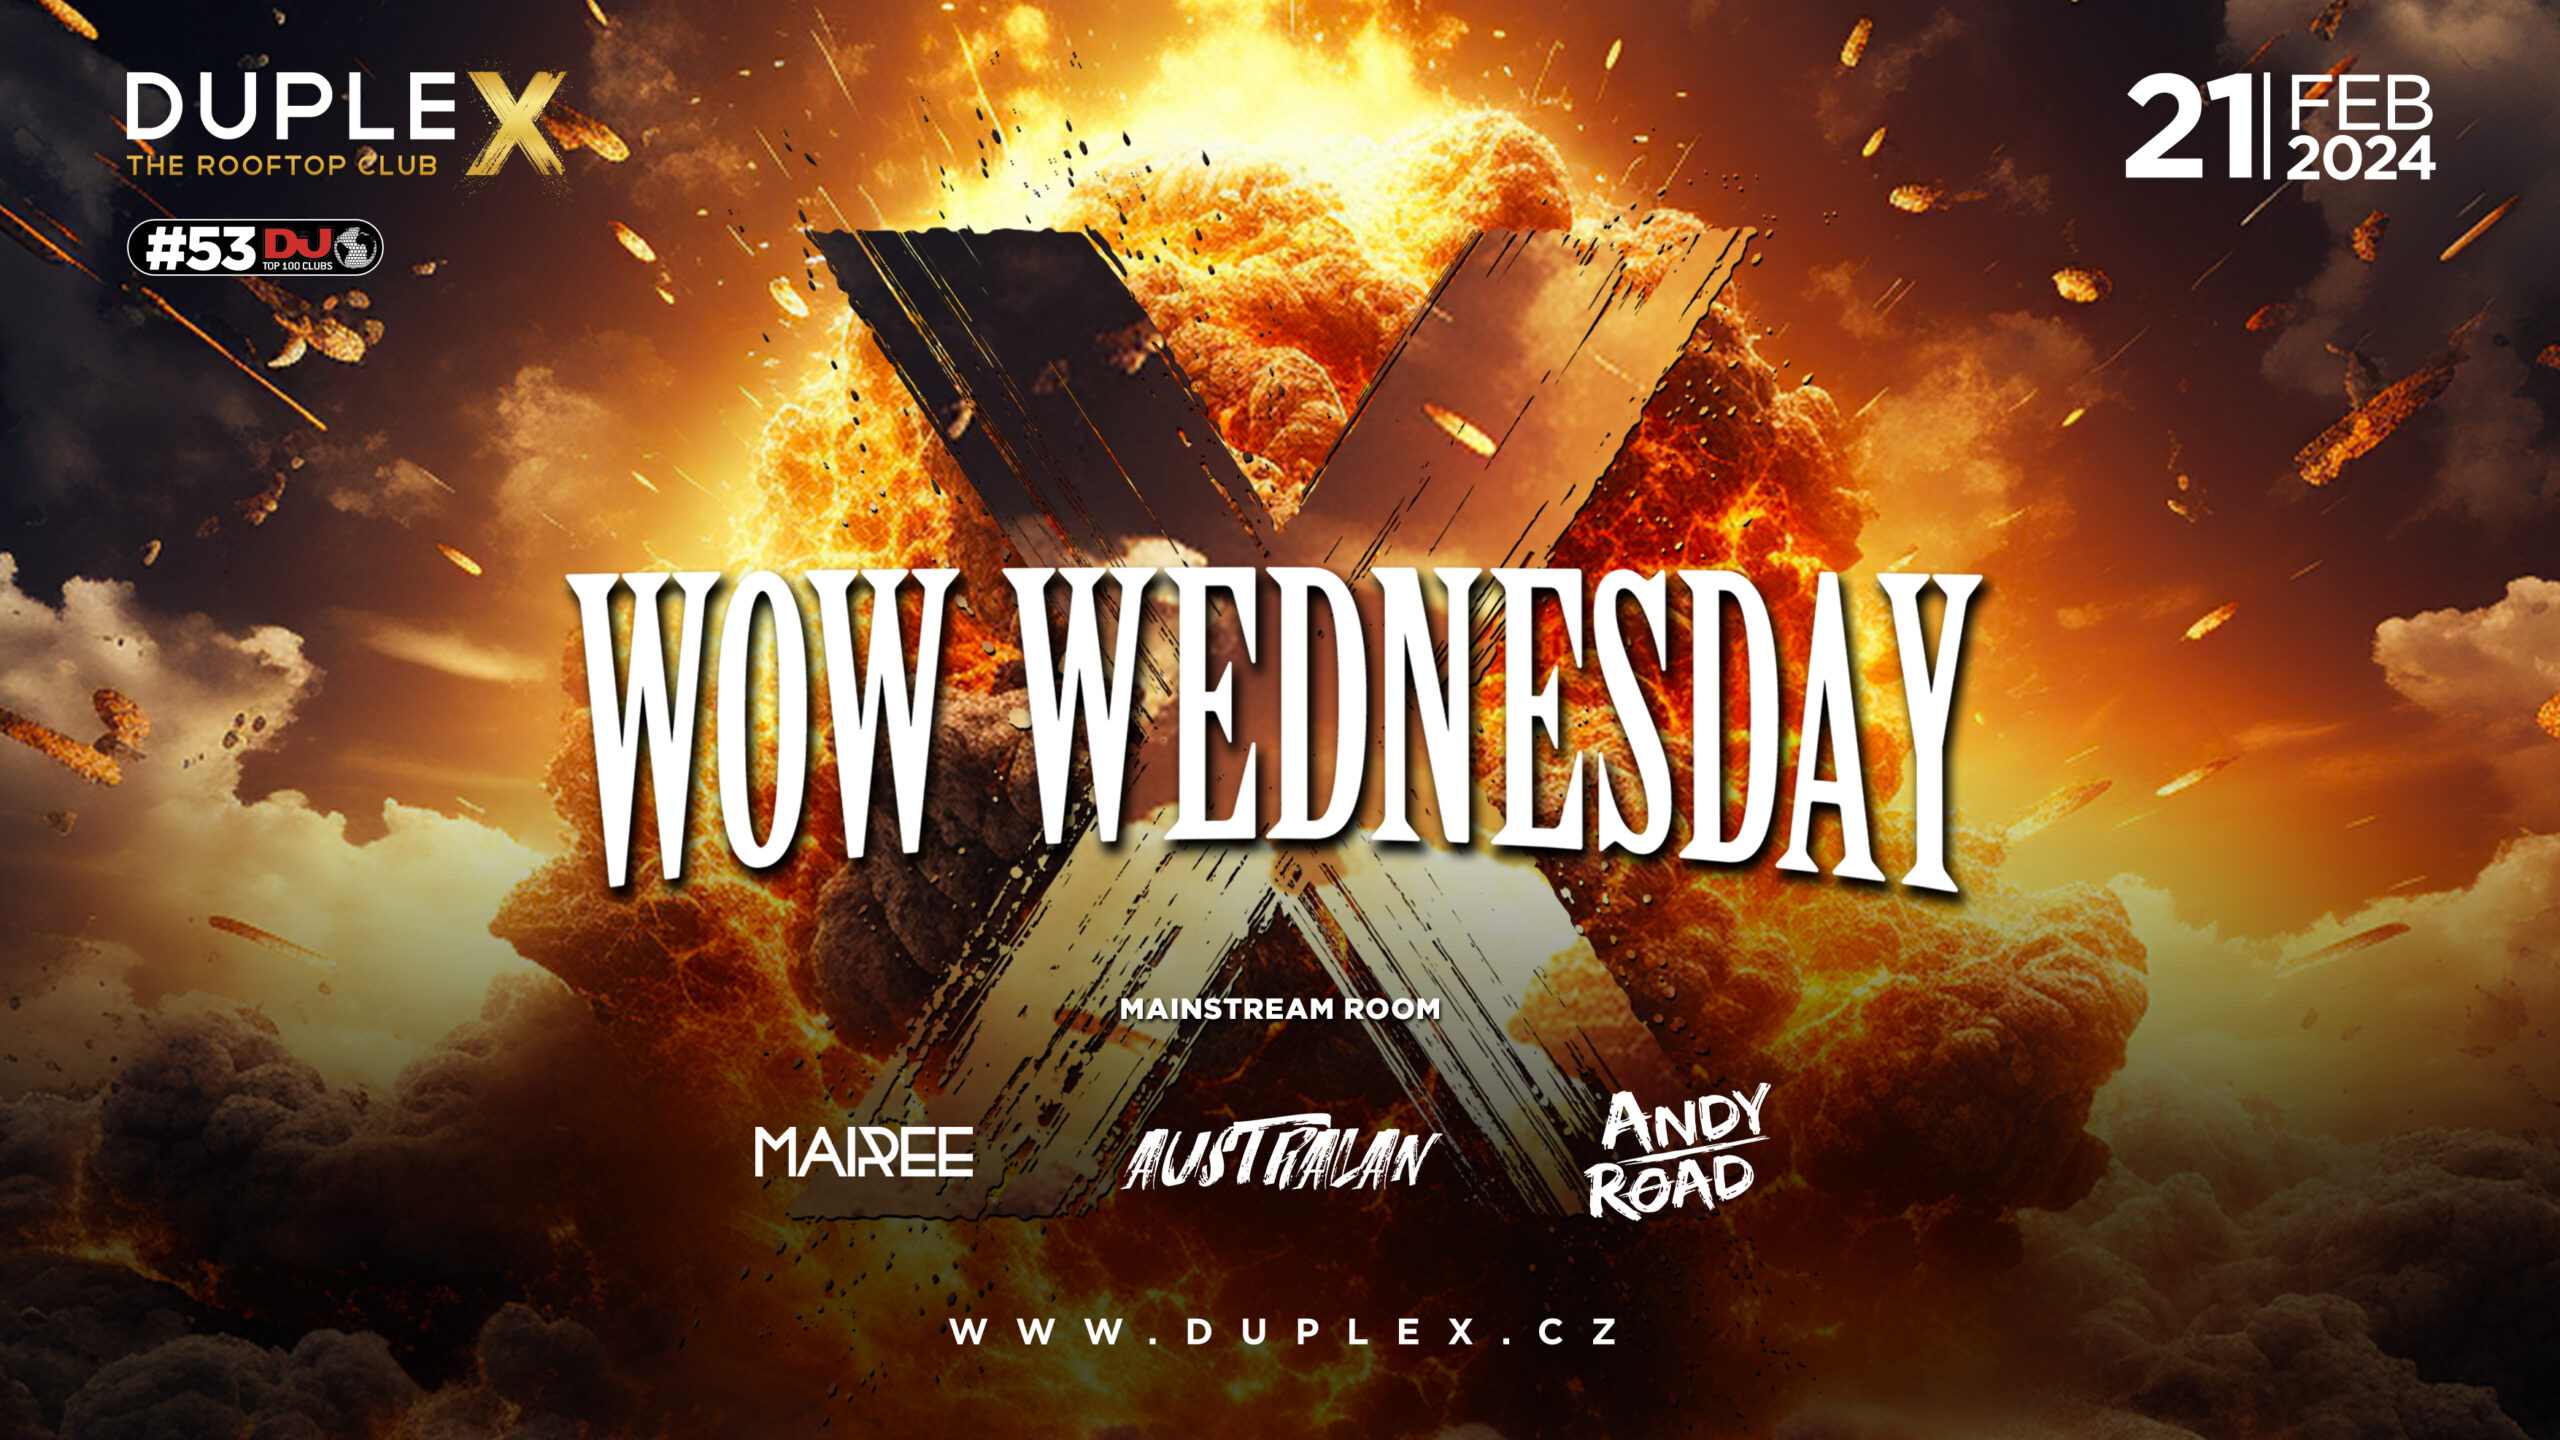 WOW Students Wednesday: The ultimate Erasmus party at DupleX Prague